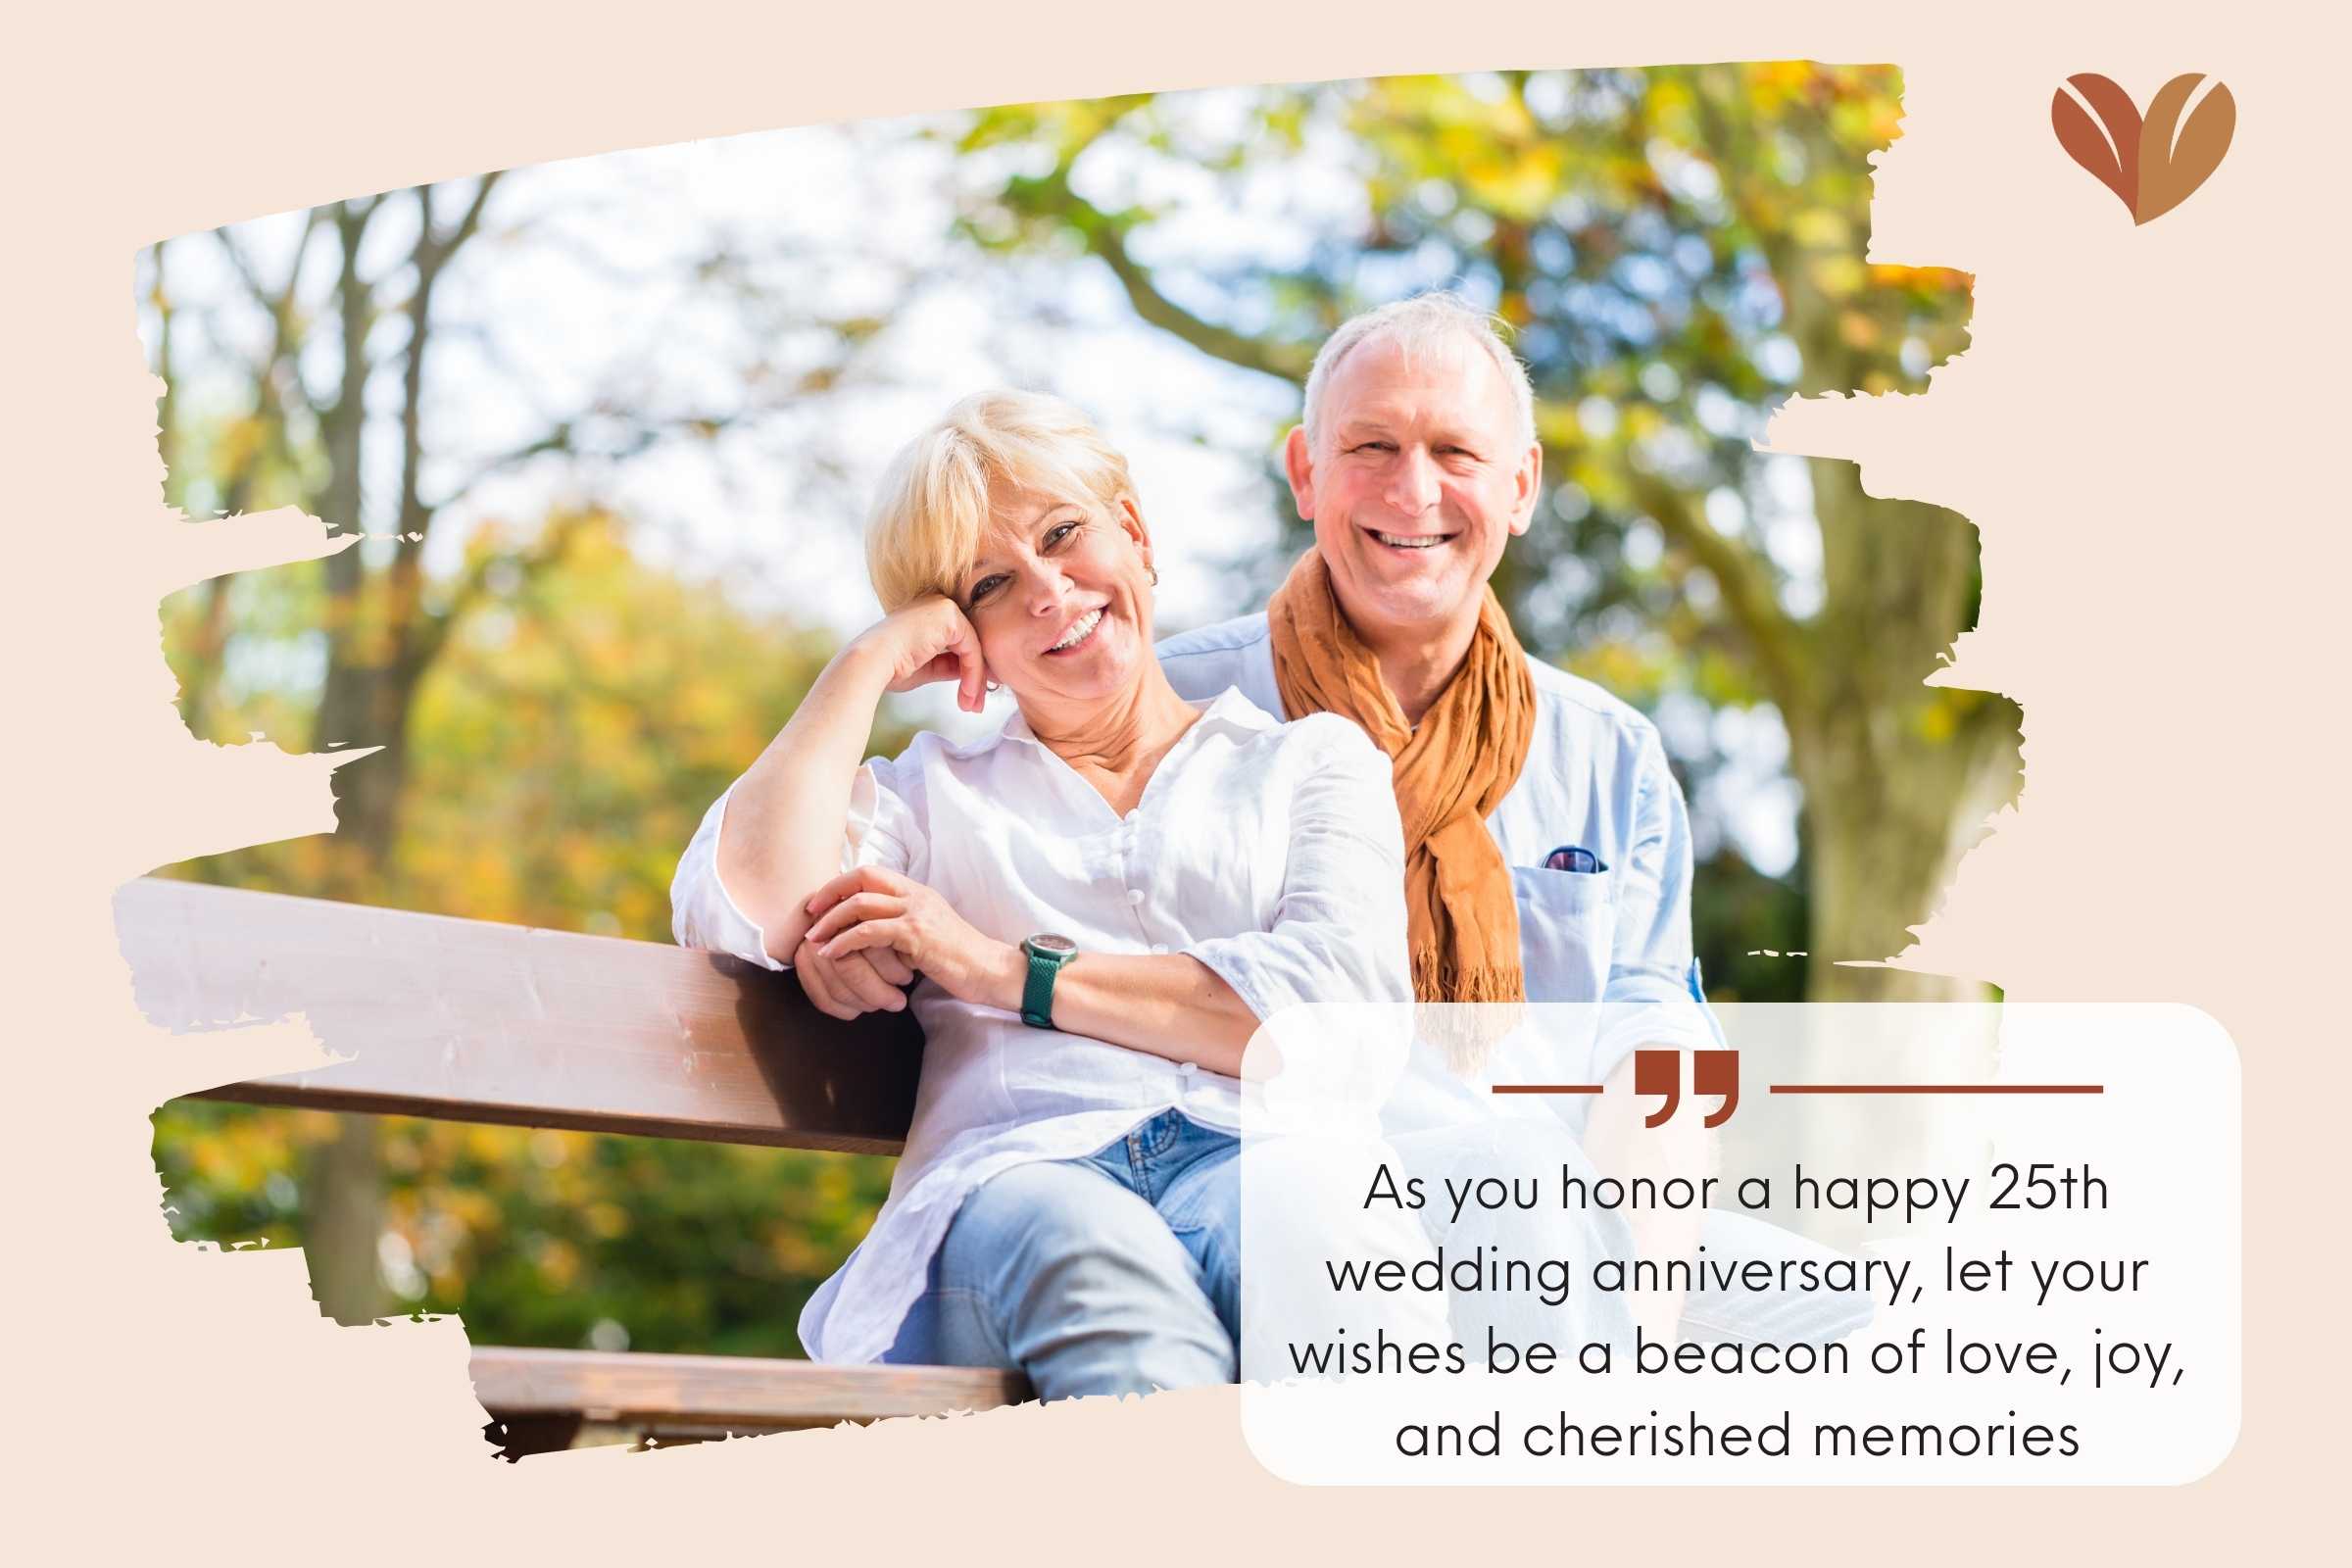 A loving couple embraces, accompanied by happy 25th wedding anniversary wishes.